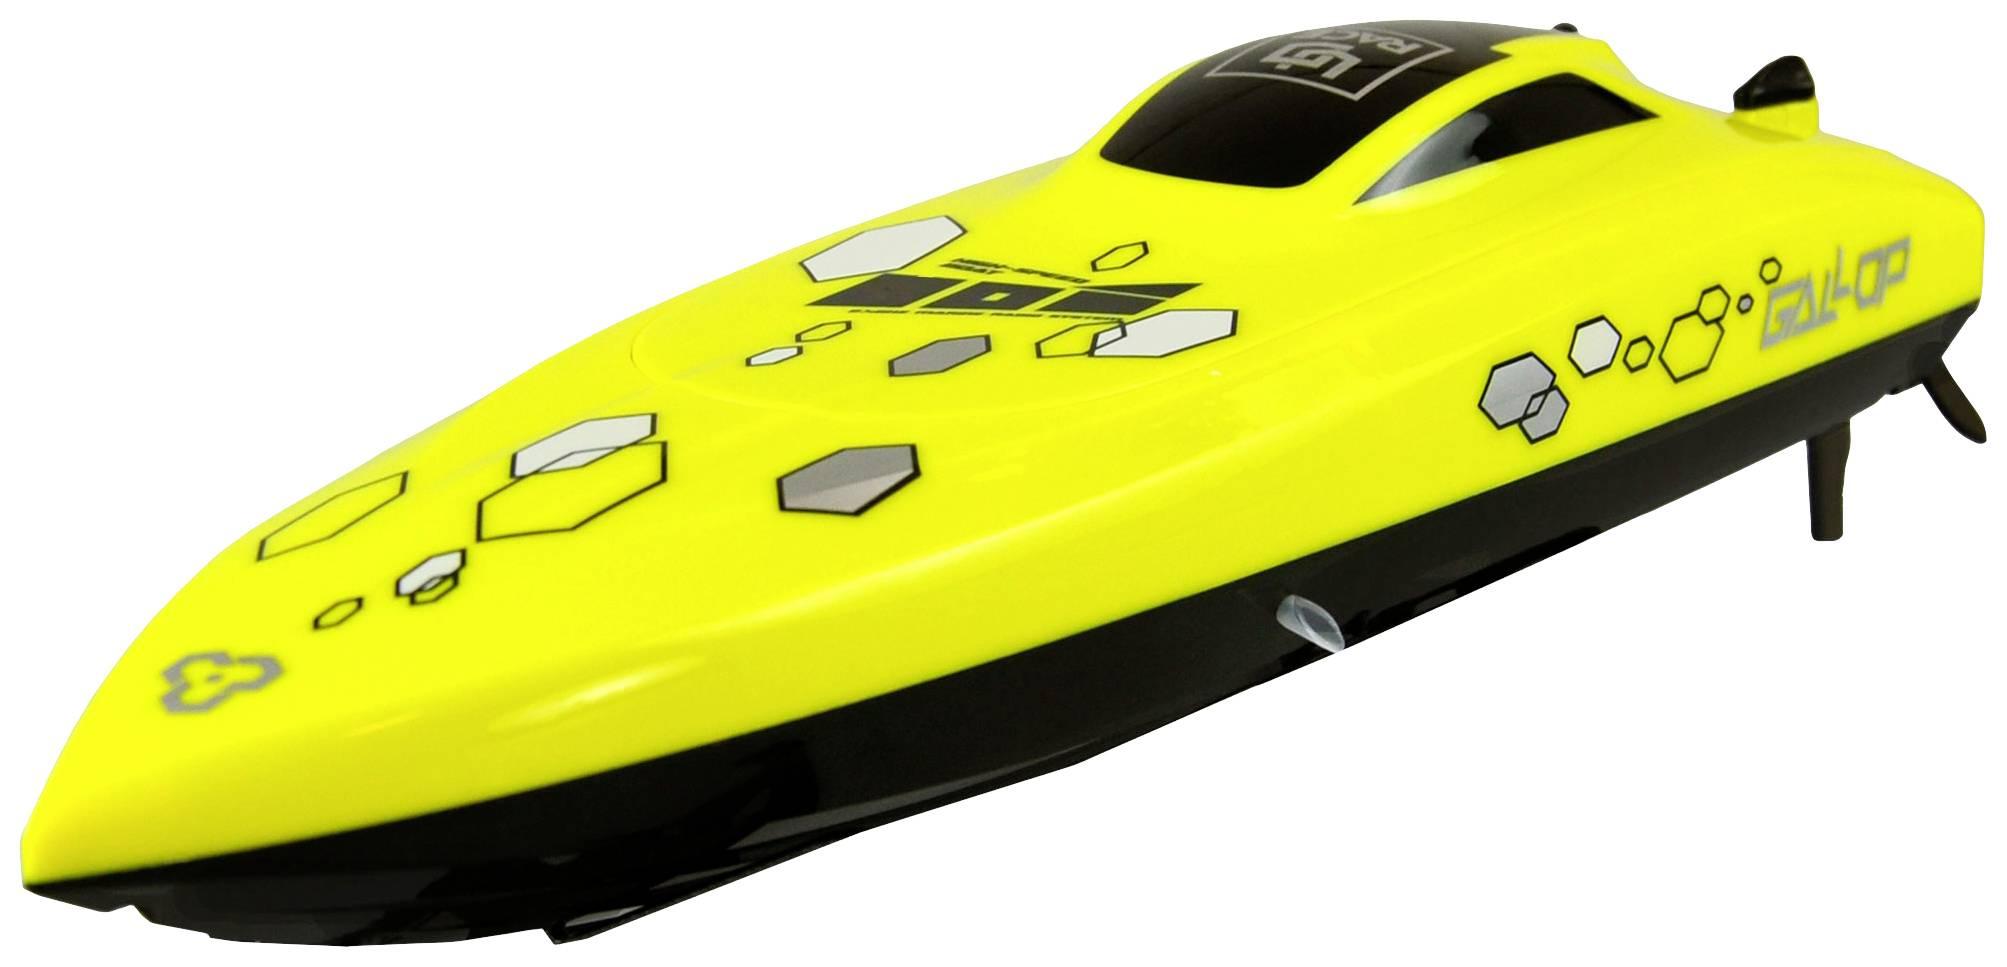 Amewi Rc Boat: Amewi RC Boat: Pros and Cons to Consider